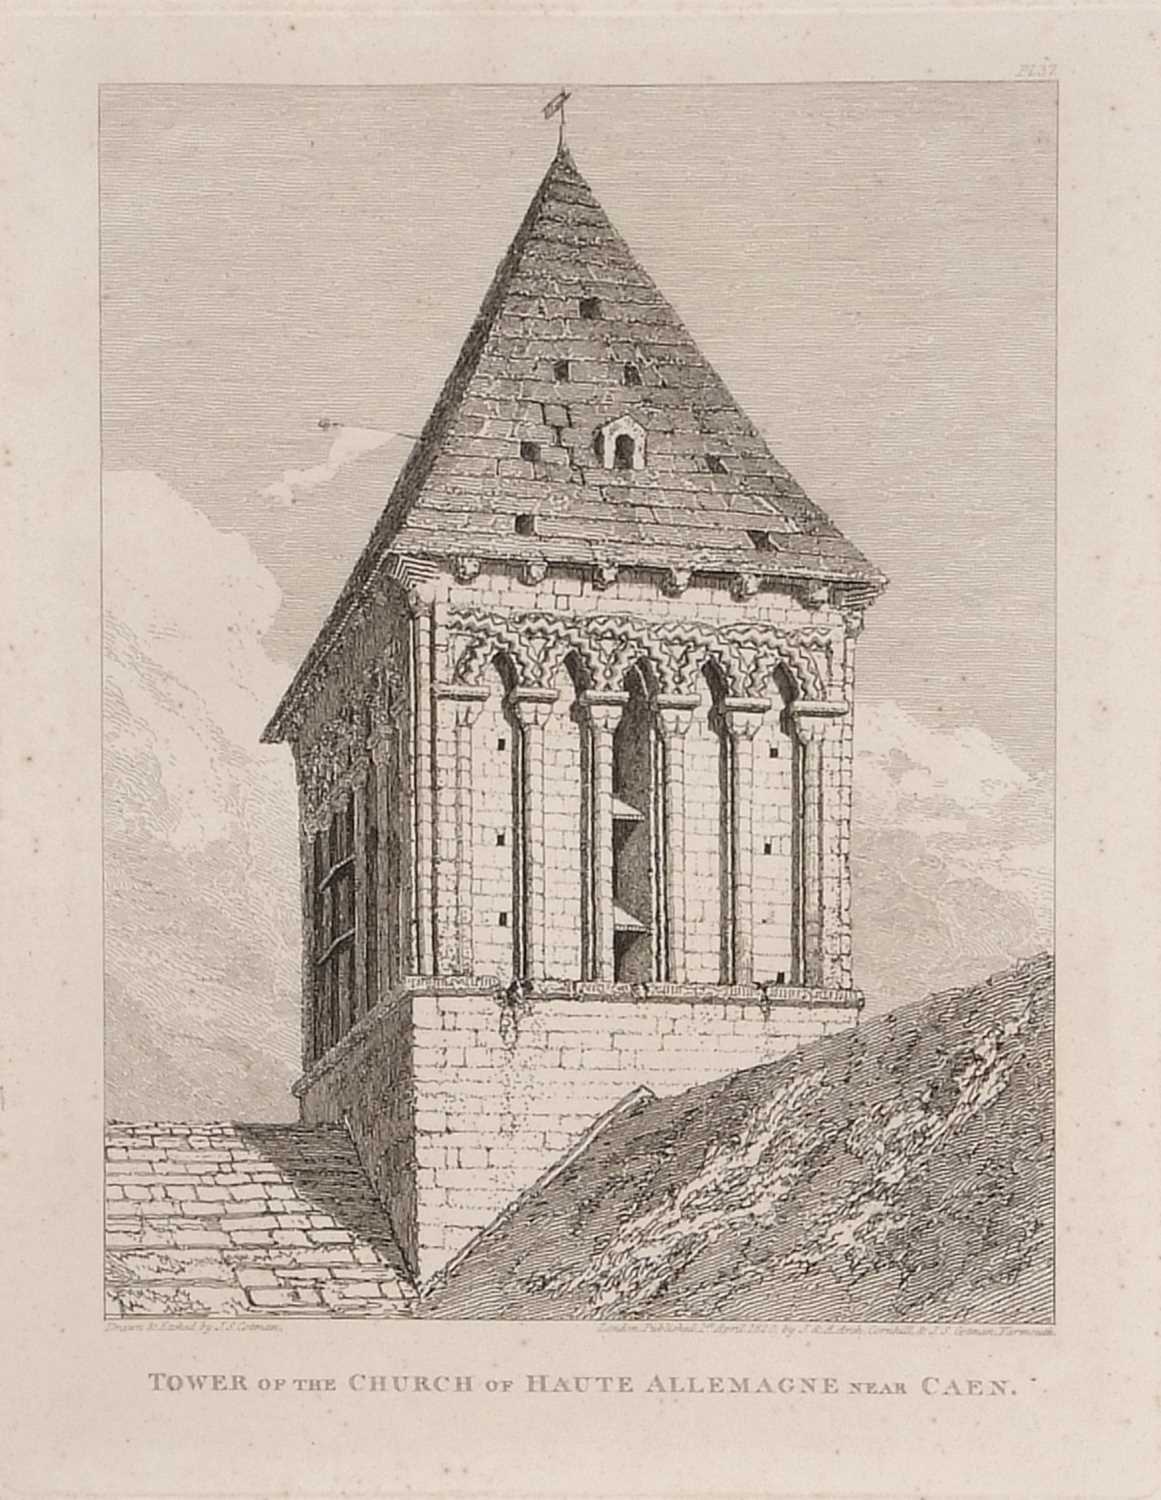 John Sell Cotman (1782-1842),'Tower of the church of Haut Allemagne, near Caen', from 'Architectural